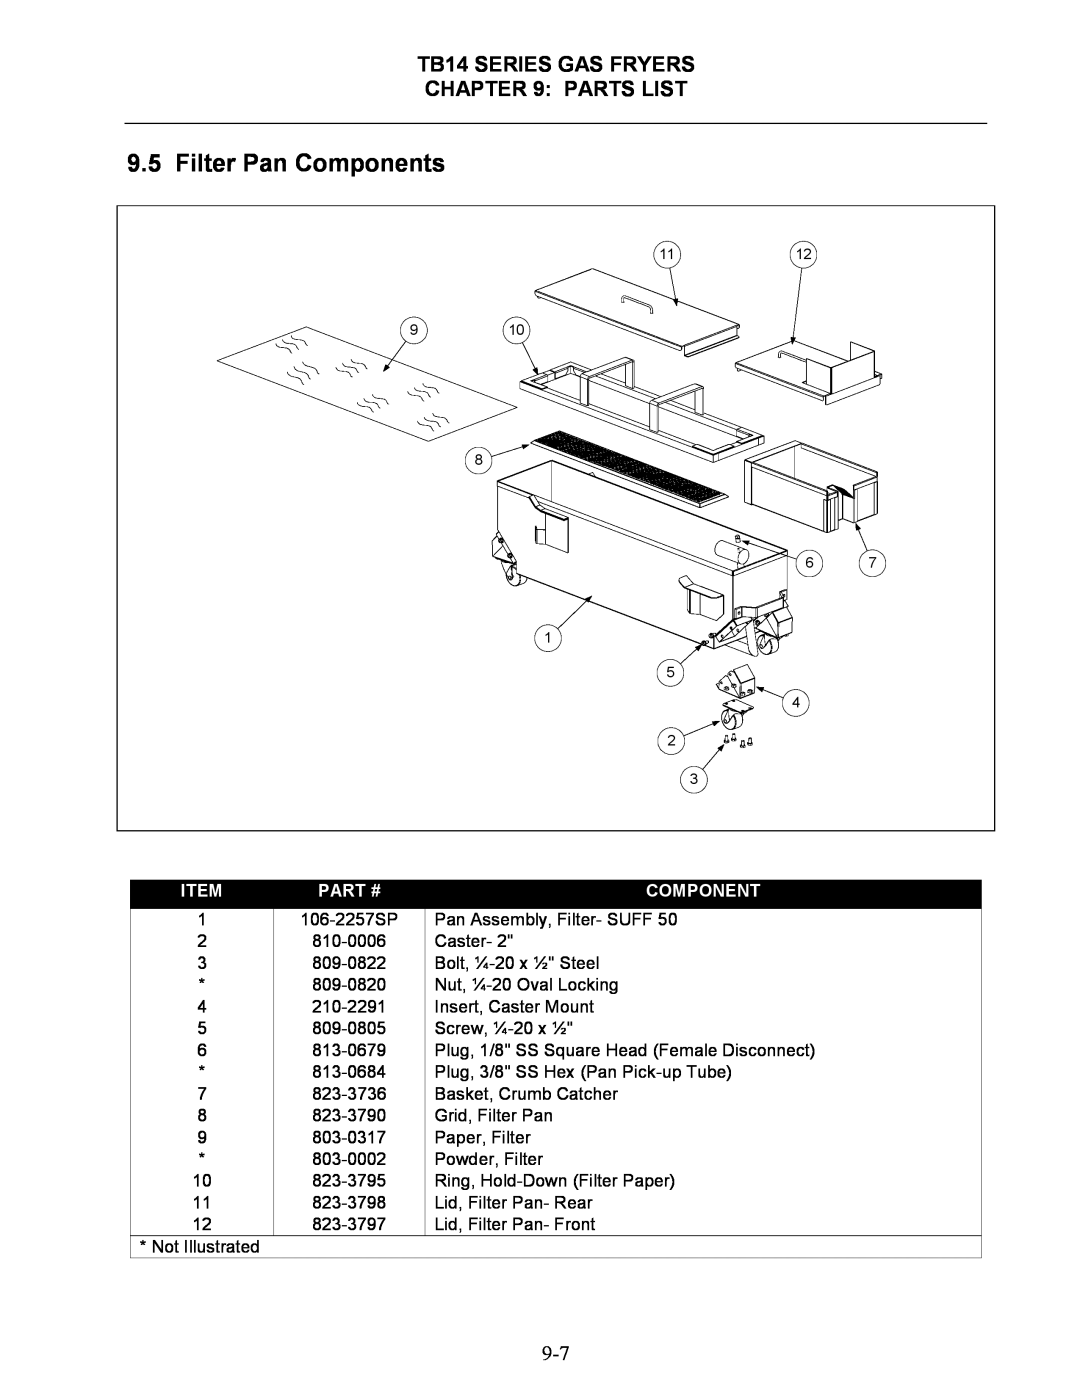 Frymaster operation manual Filter Pan Components, TB14 SERIES GAS FRYERS PARTS LIST, Part # 